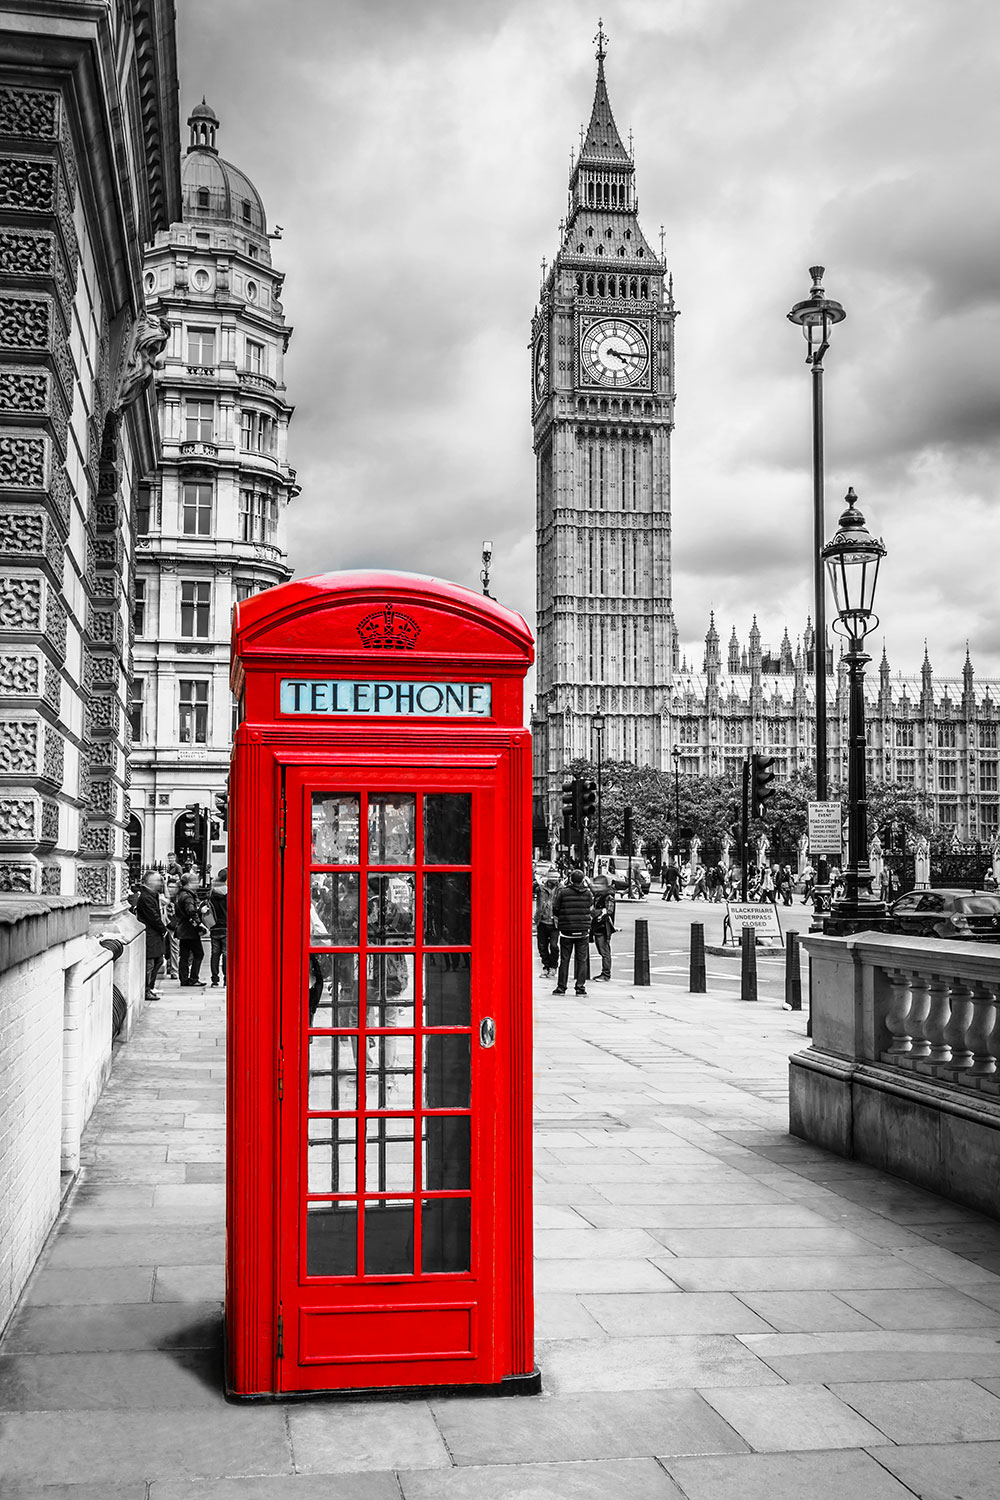 london wallpaper for walls,telephone booth,payphone,red,telephony,landmark